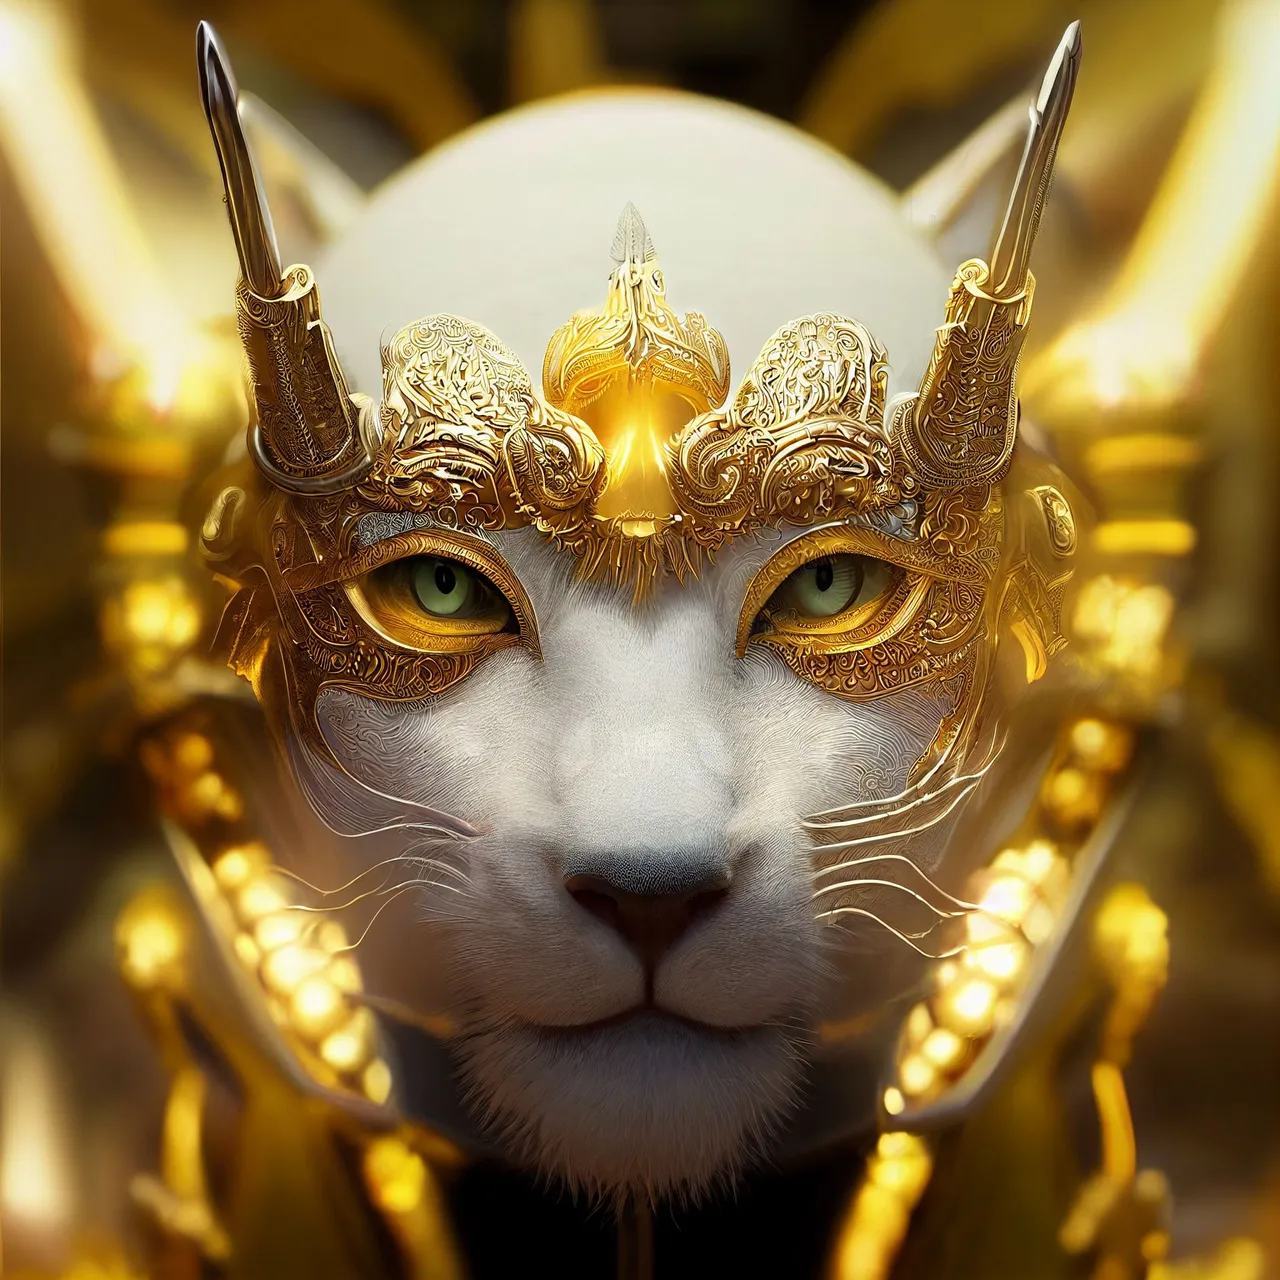 Ed_Privat_beautiful_white_panther_god_surreal_mythical_dreamy_a_f64f1925-2364-461a-b07f-0afe302b65f2.png